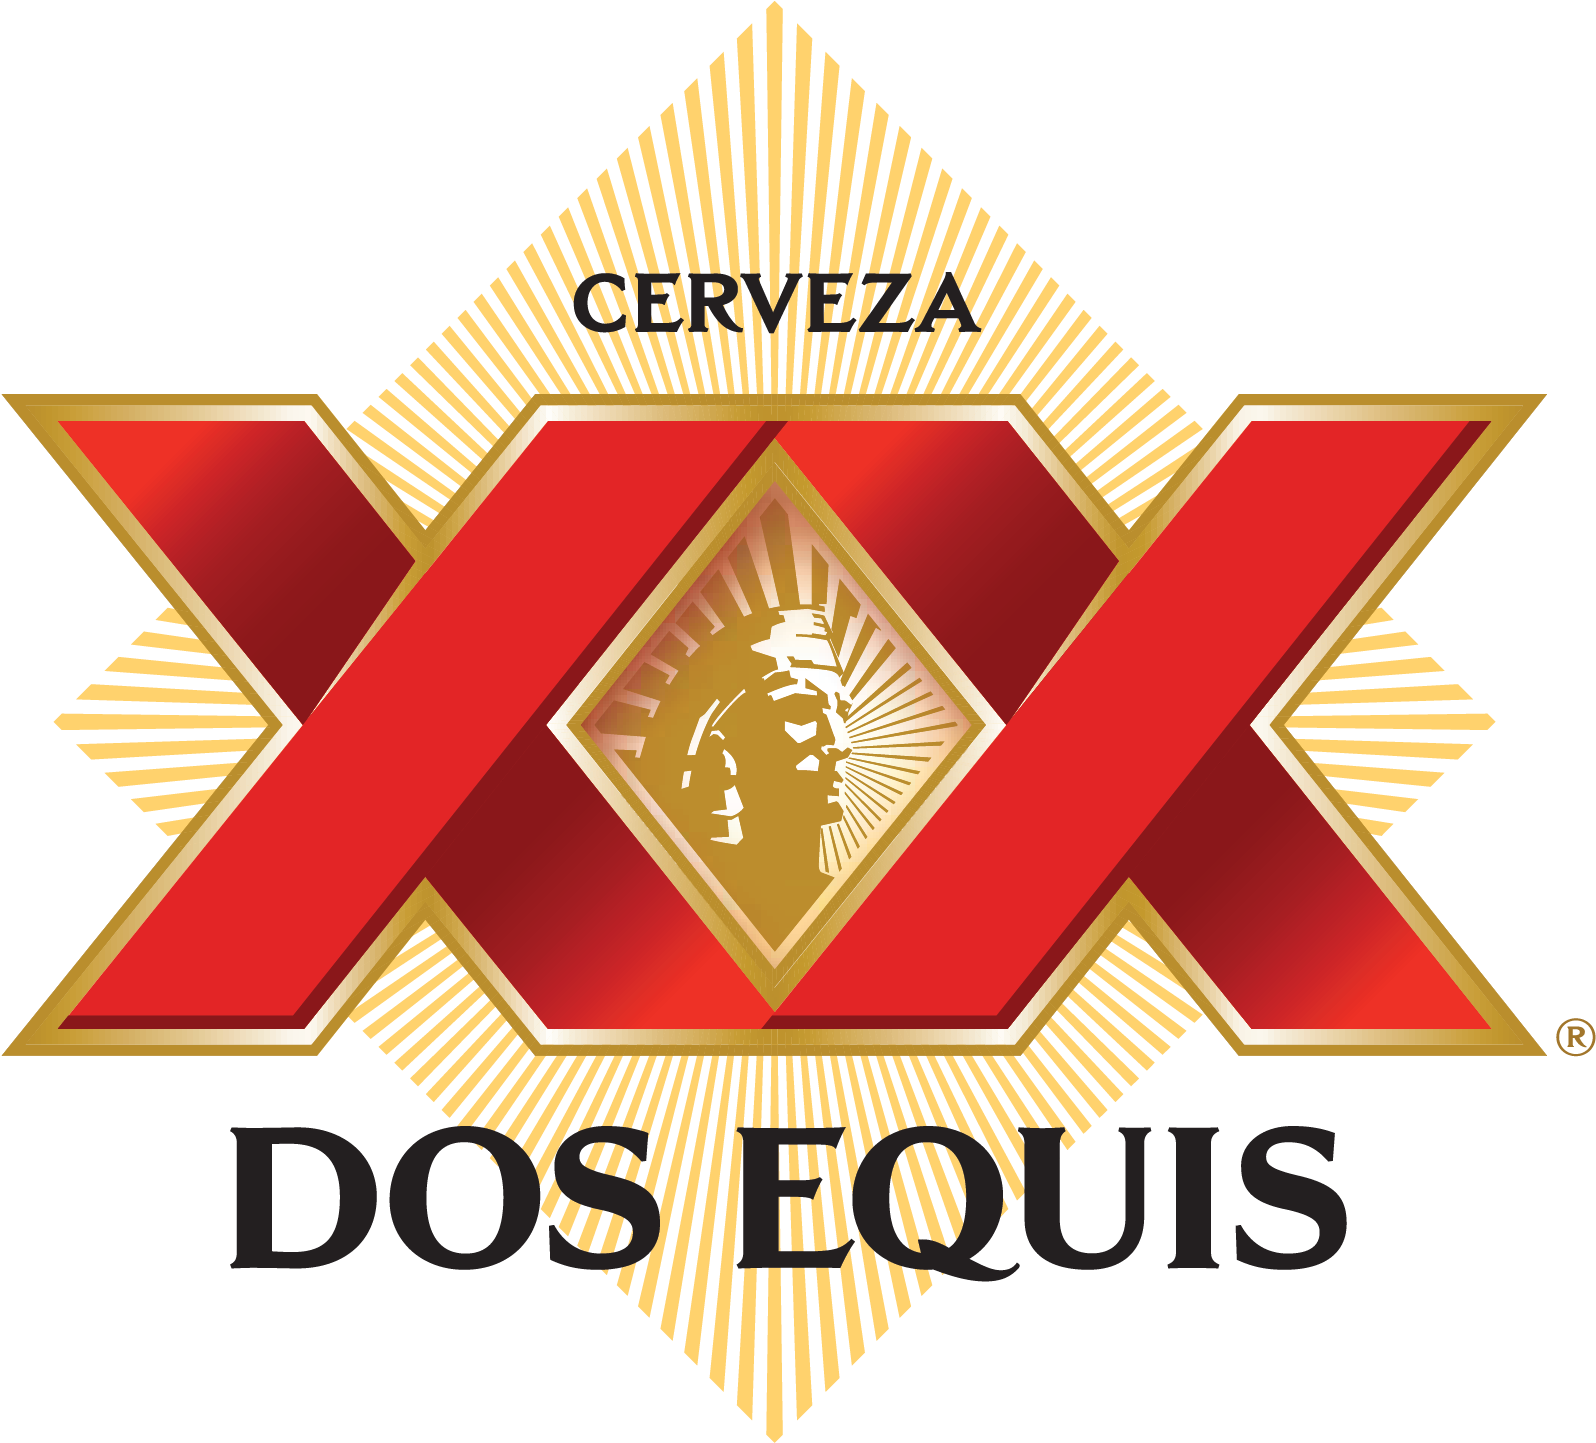 Dos Equis Logo Png Clipart - Large Size Png Image - PikPng.